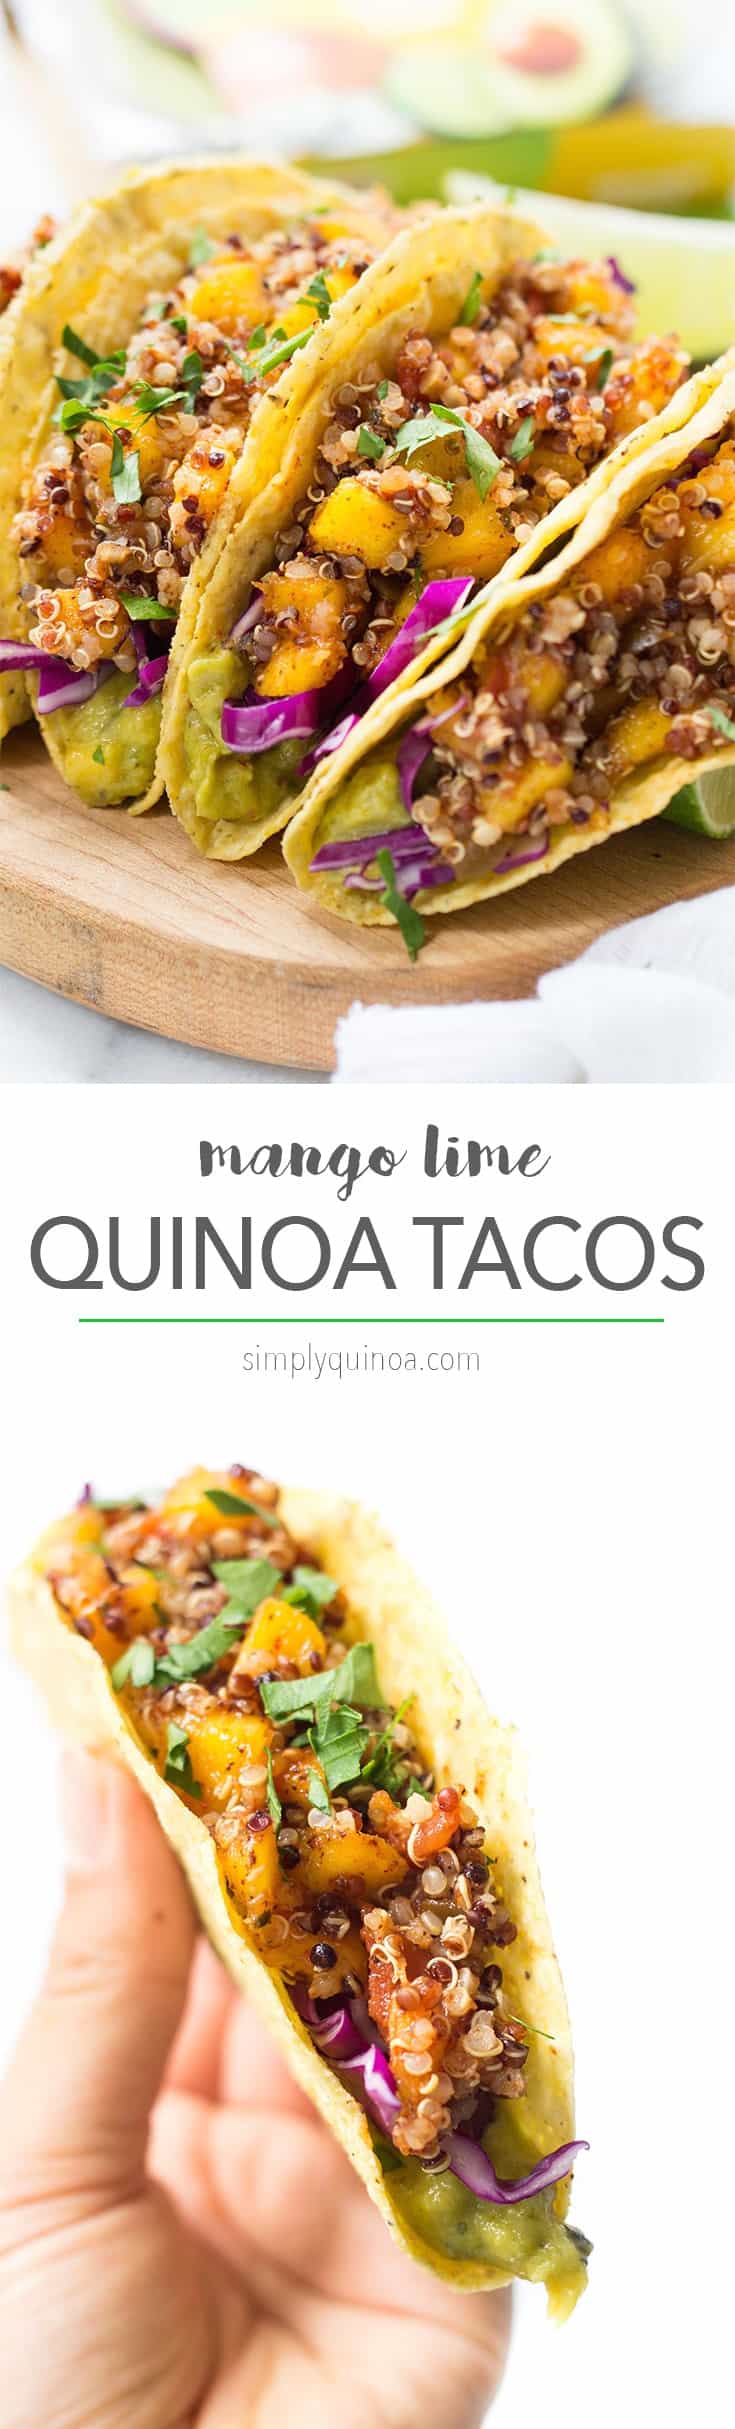 10-MINUTE QUINOA TACOS with a spicy mango-lime filling, red cabbage and creamy guacamole dip on the bottom! [vegan + gluten-free]